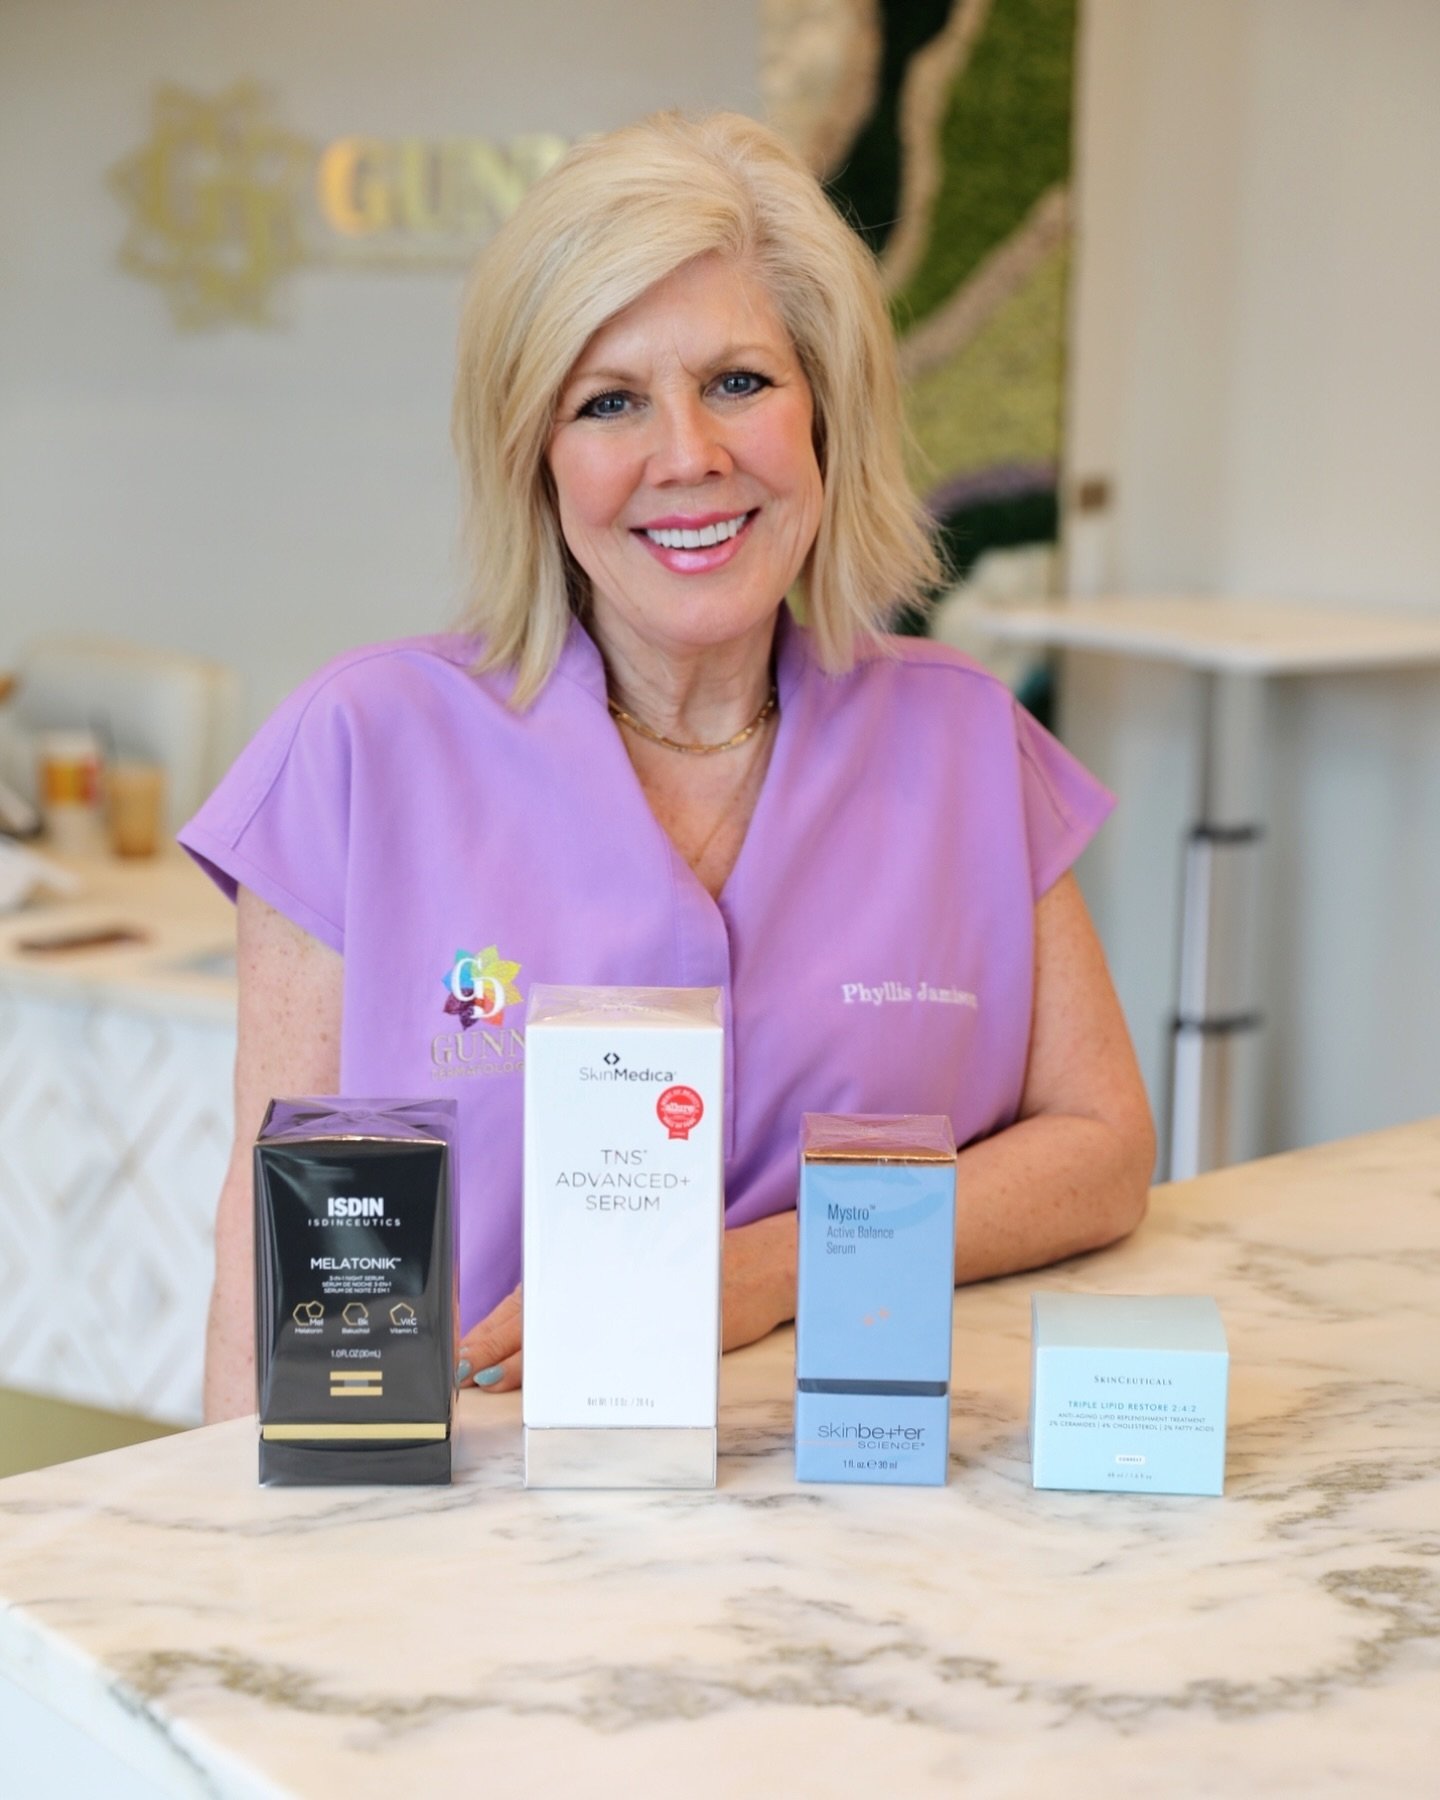 ✨Glow like Phyllis with her top skincare picks! 

✨One of her favorite anti-aging products is Skinmedica TNS! It&rsquo;s loaded with growth factors to improve the appearance of wrinkles and sagging skin. 

✨A newer product that she is loving is Skinb